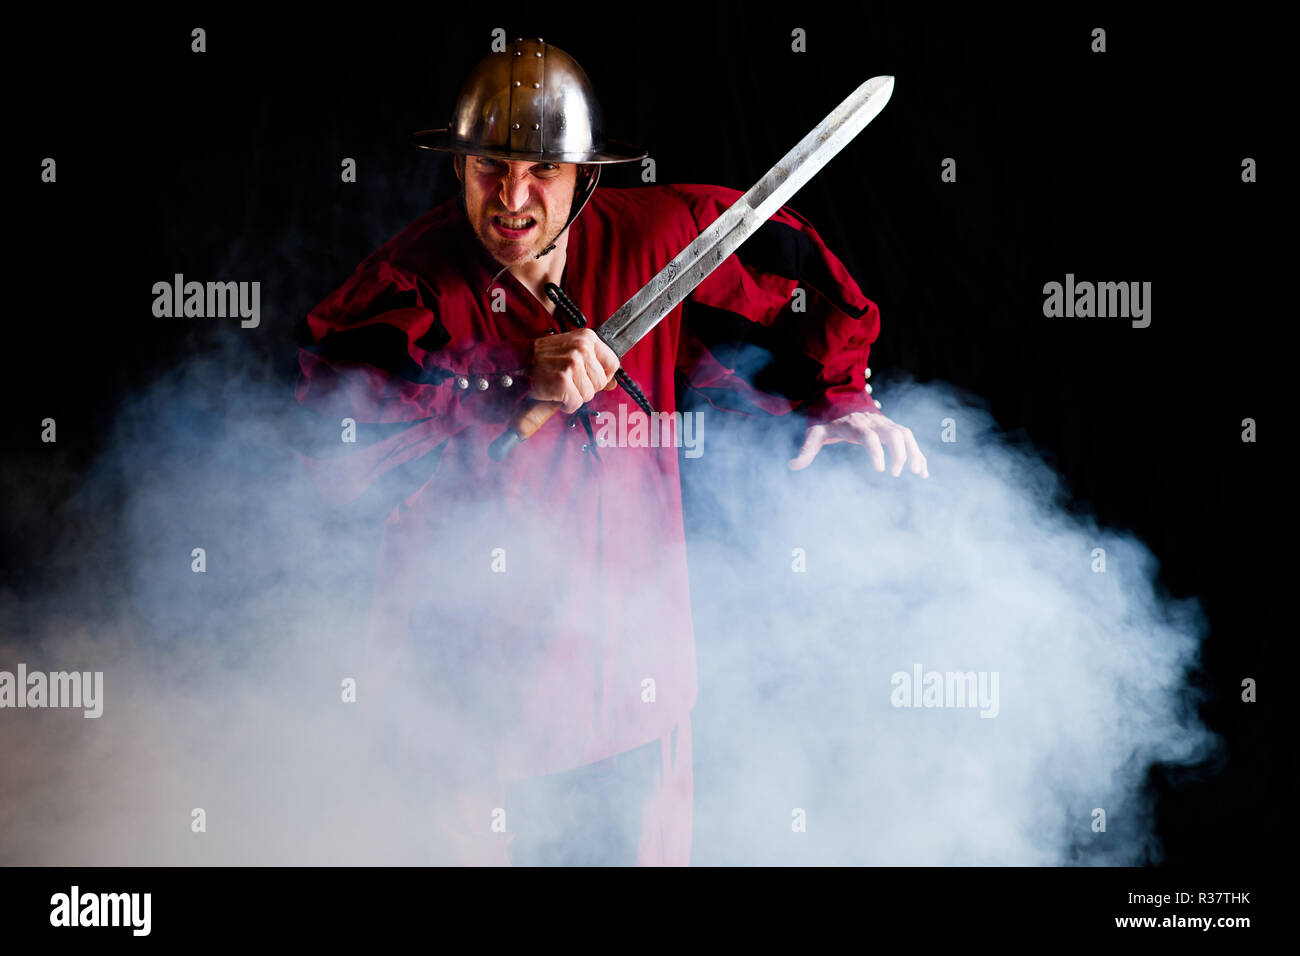 Man, with helmet and sword in fog, fighting pose, Germany Stock Photo